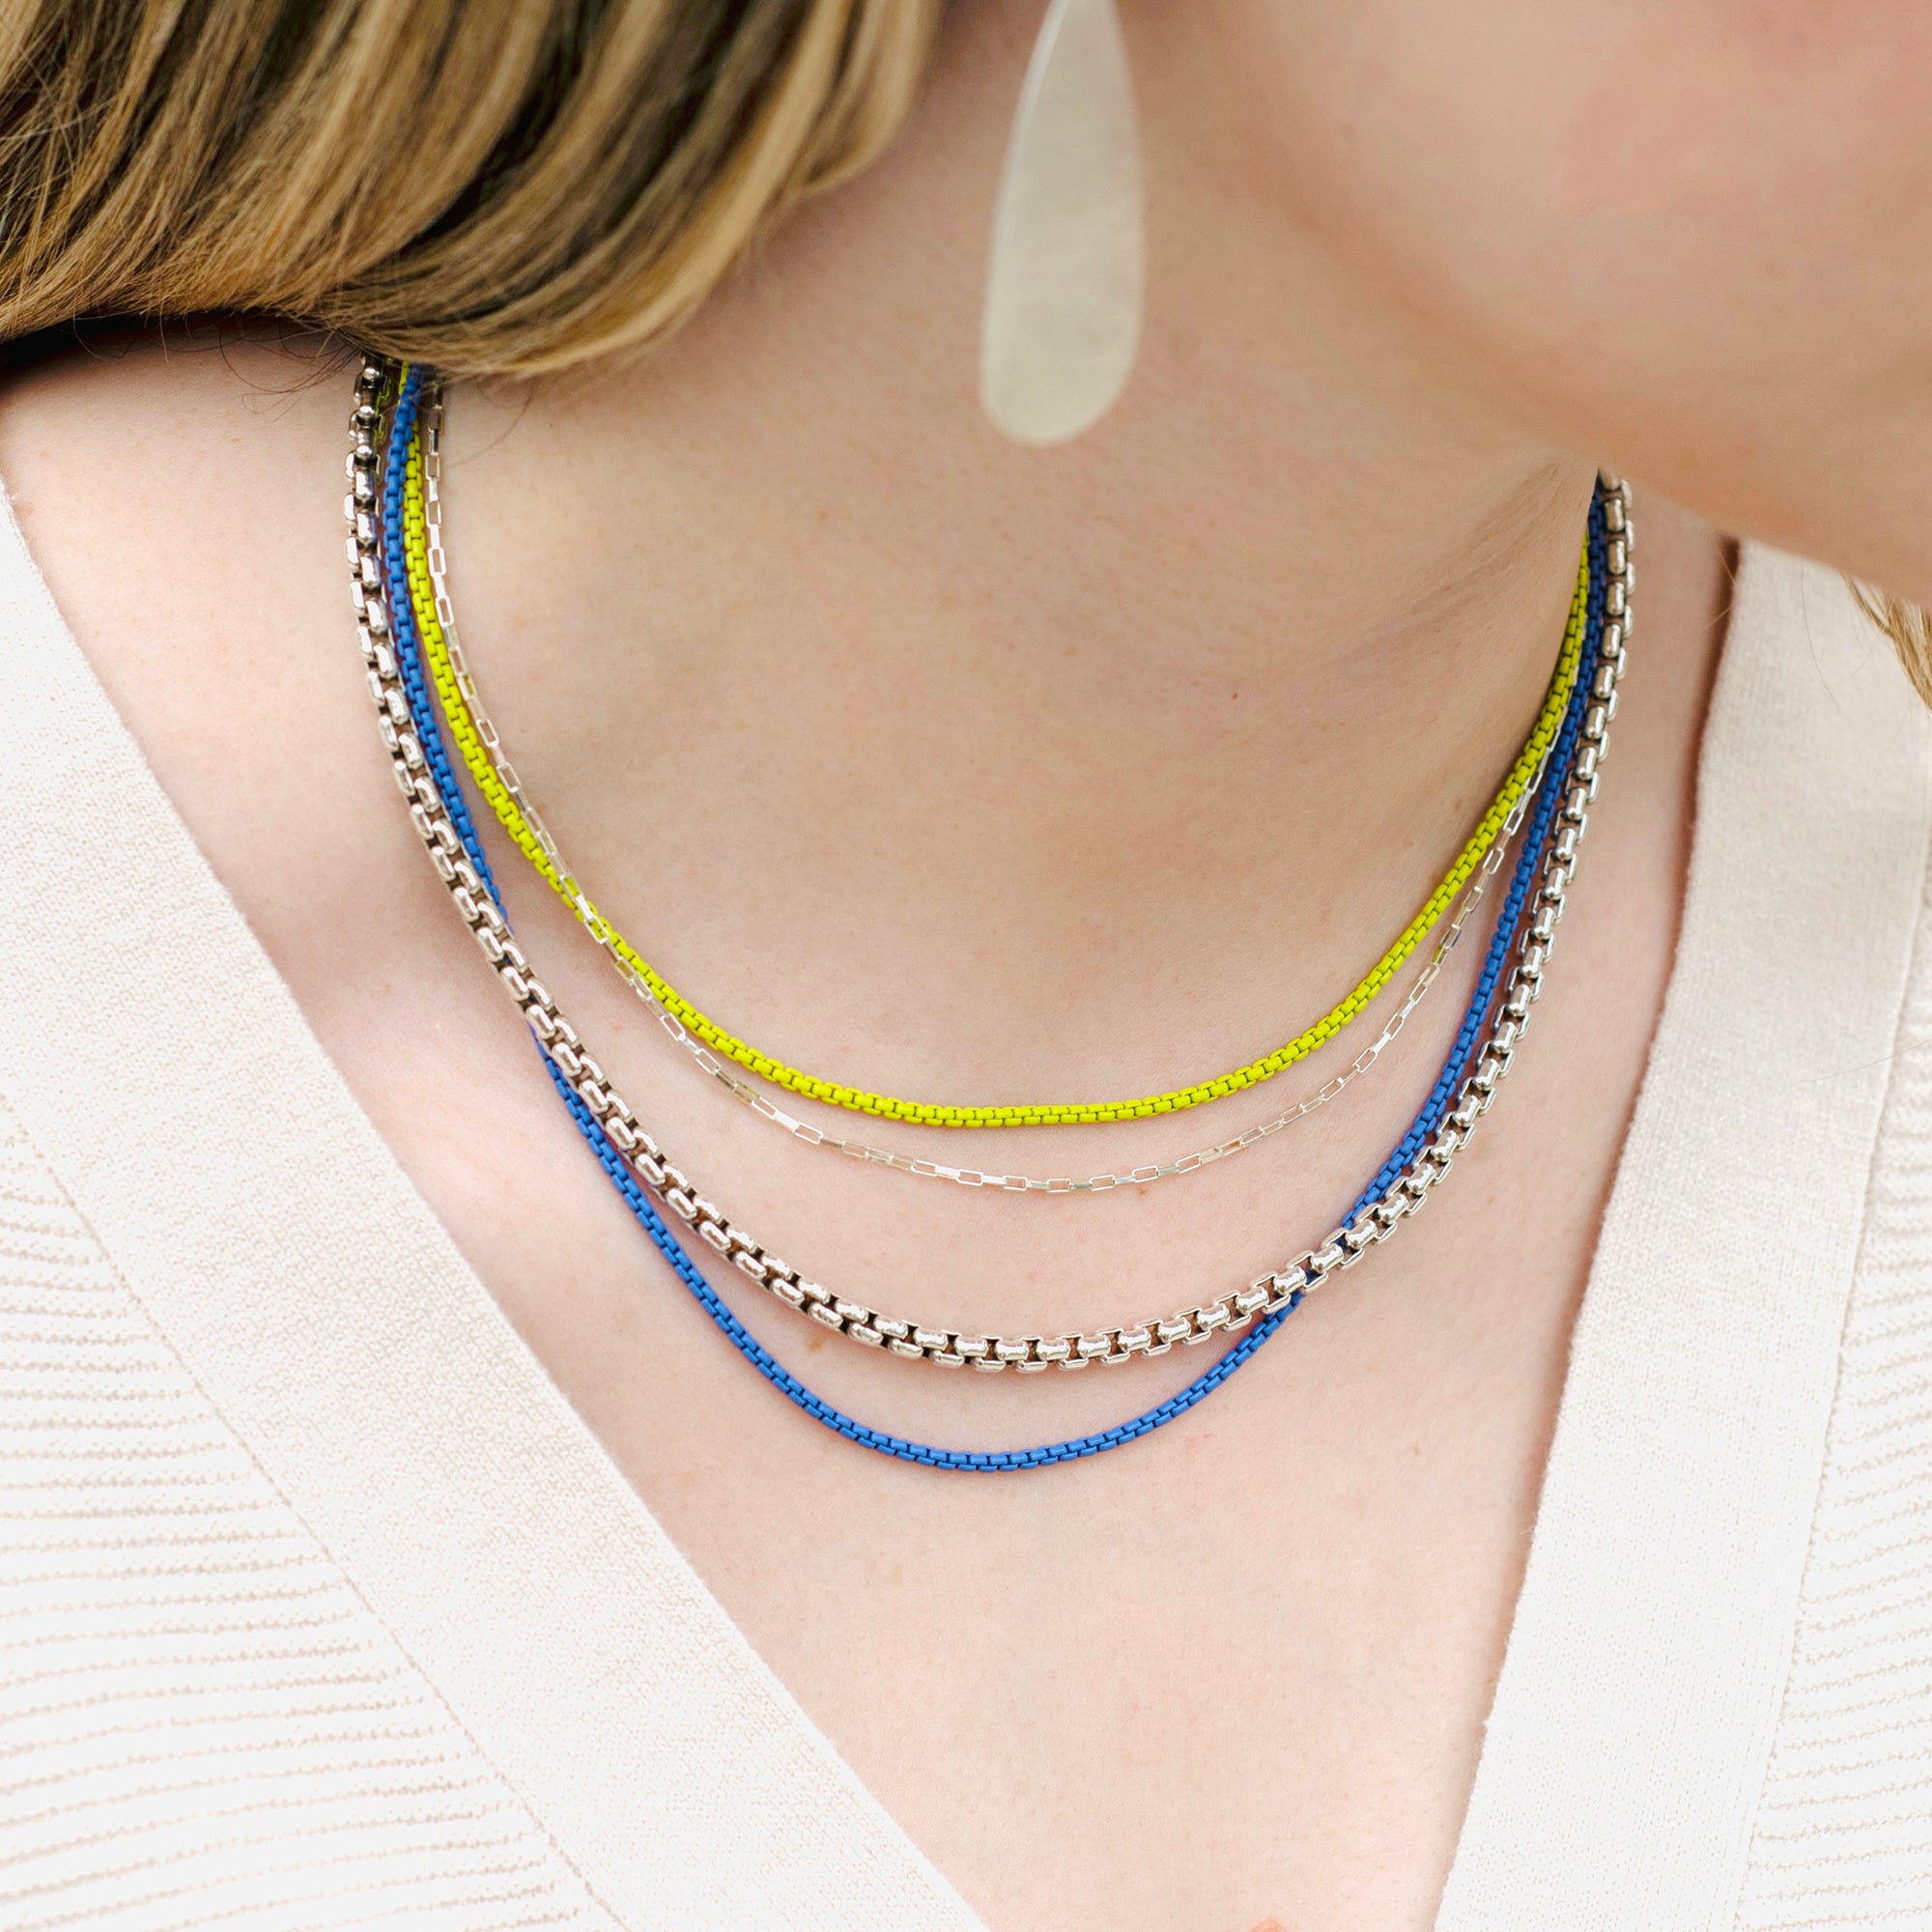 women wearing a four necklace stack with color chains and sterling silver